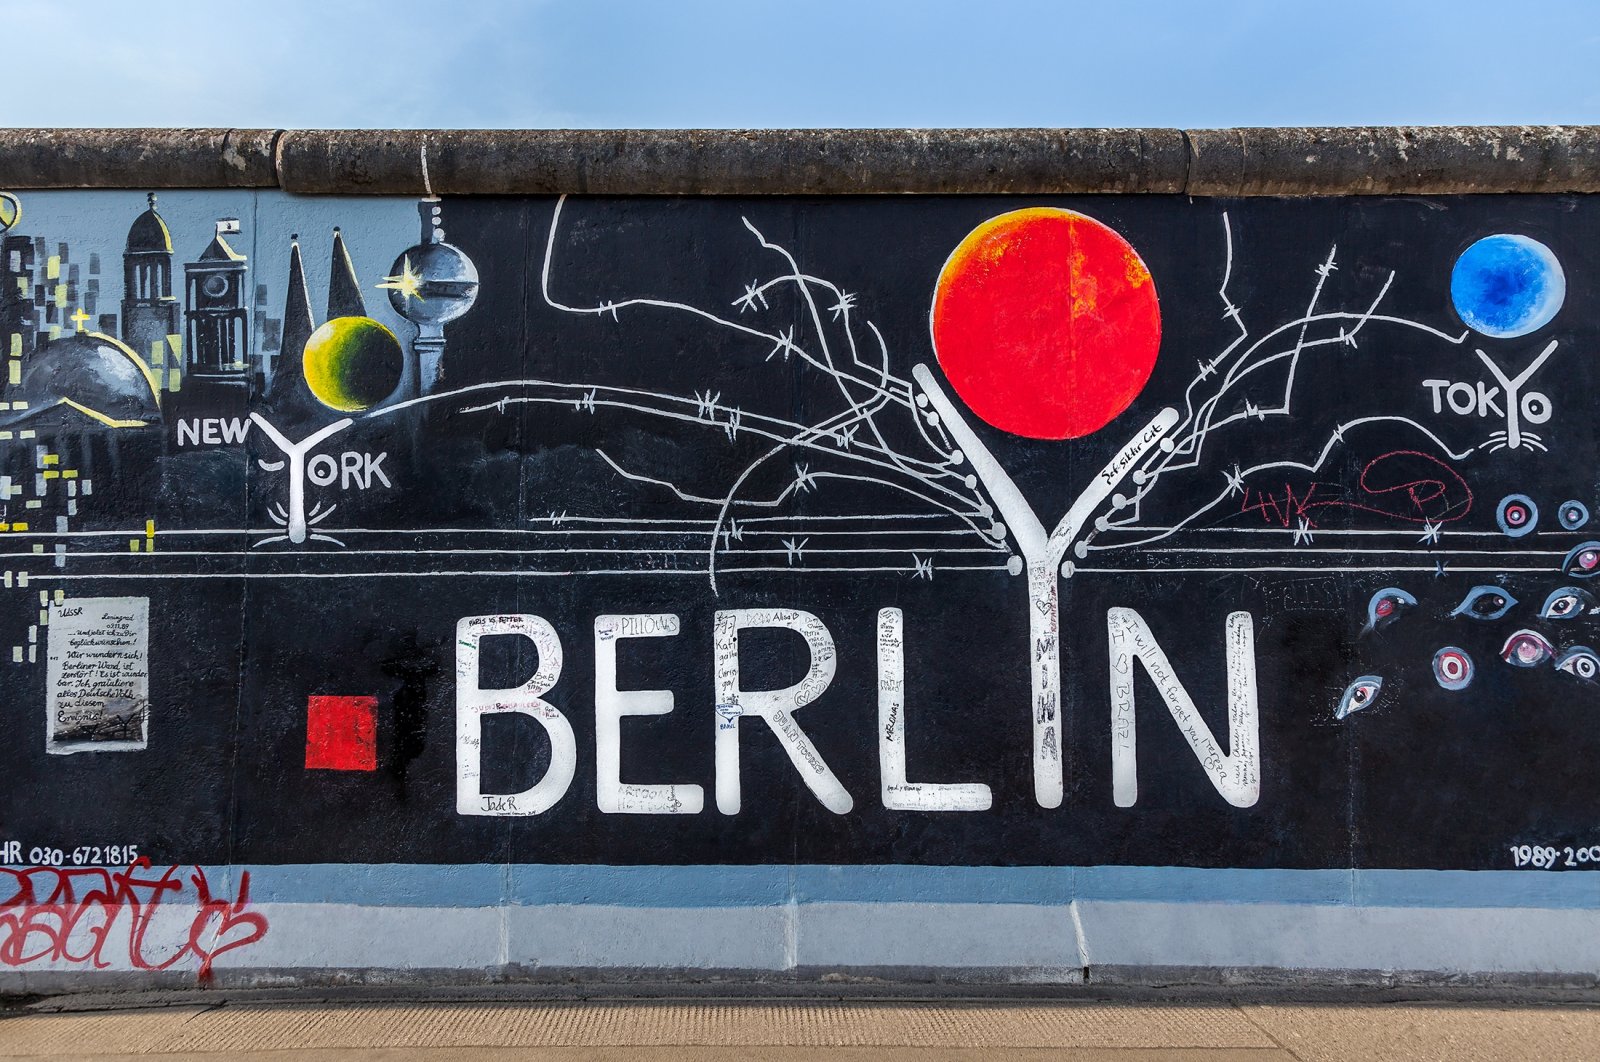 Various graffiti marking different cities can be seen on a part of the original Berlin Wall at East Side Gallery, Berlin, Germany, Sept. 15, 2014. (Shutterstock Photo)